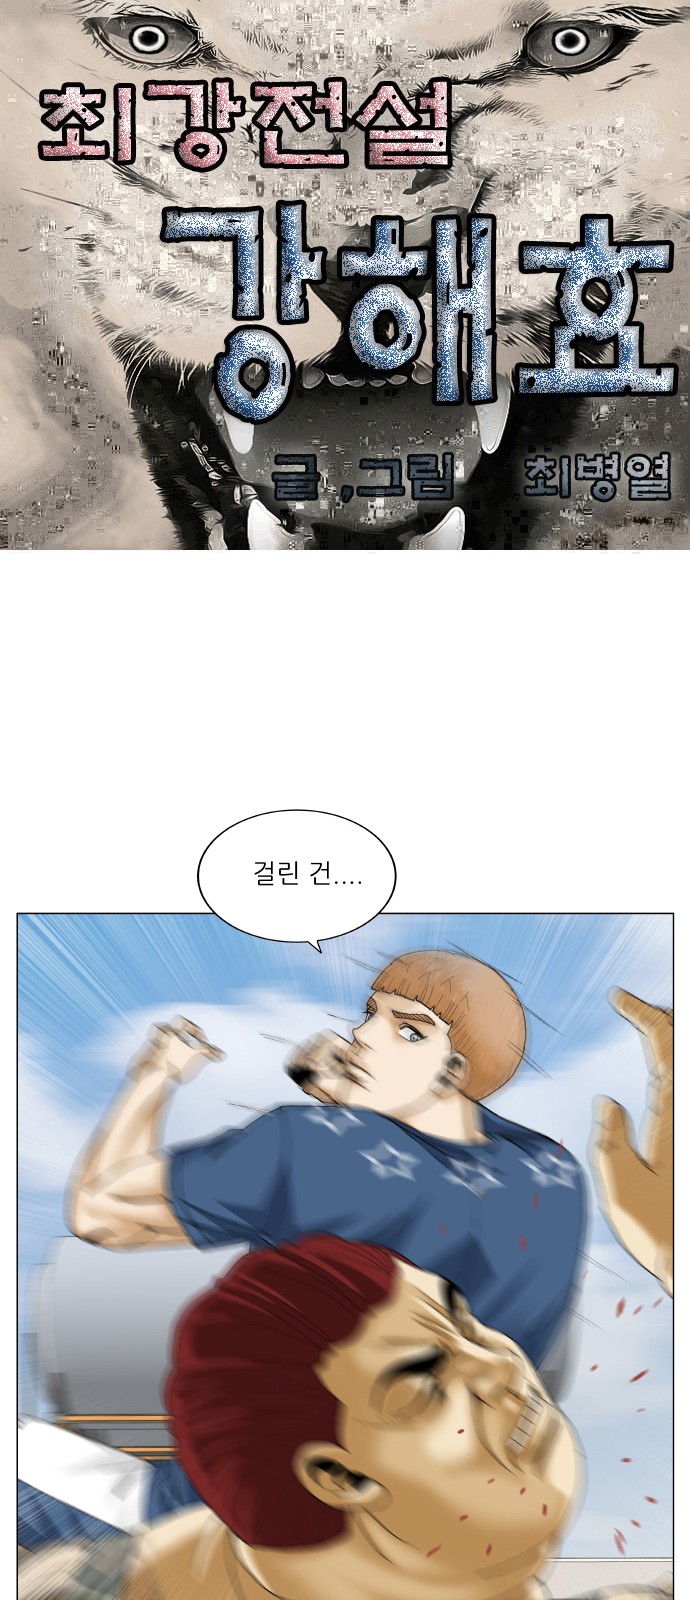 Ultimate Legend - Kang Hae Hyo - Chapter 466 - Page 1